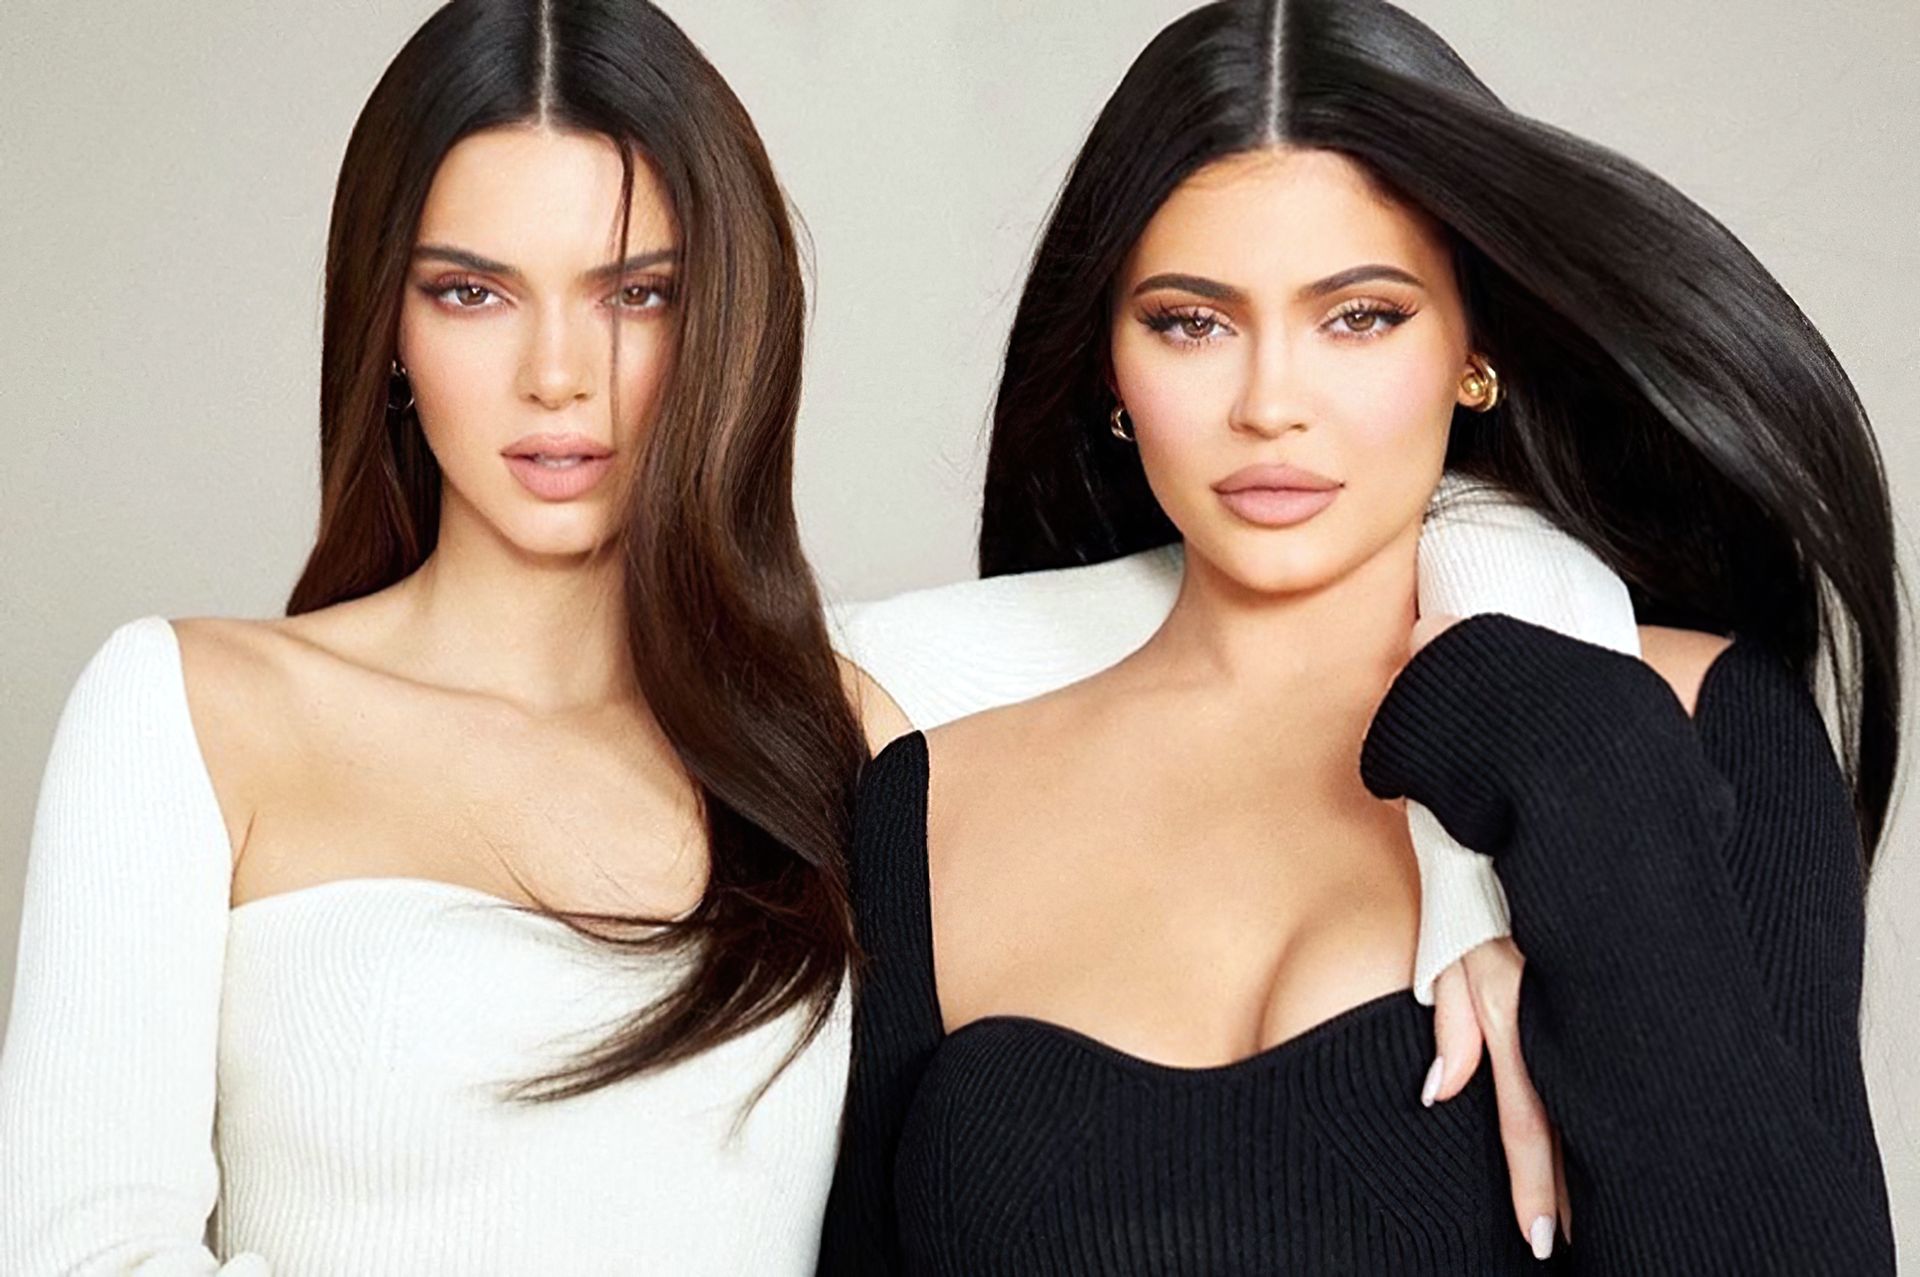 Kendall & Kylie Jenner Pose for Their Beauty Product Launch (4 Photos)